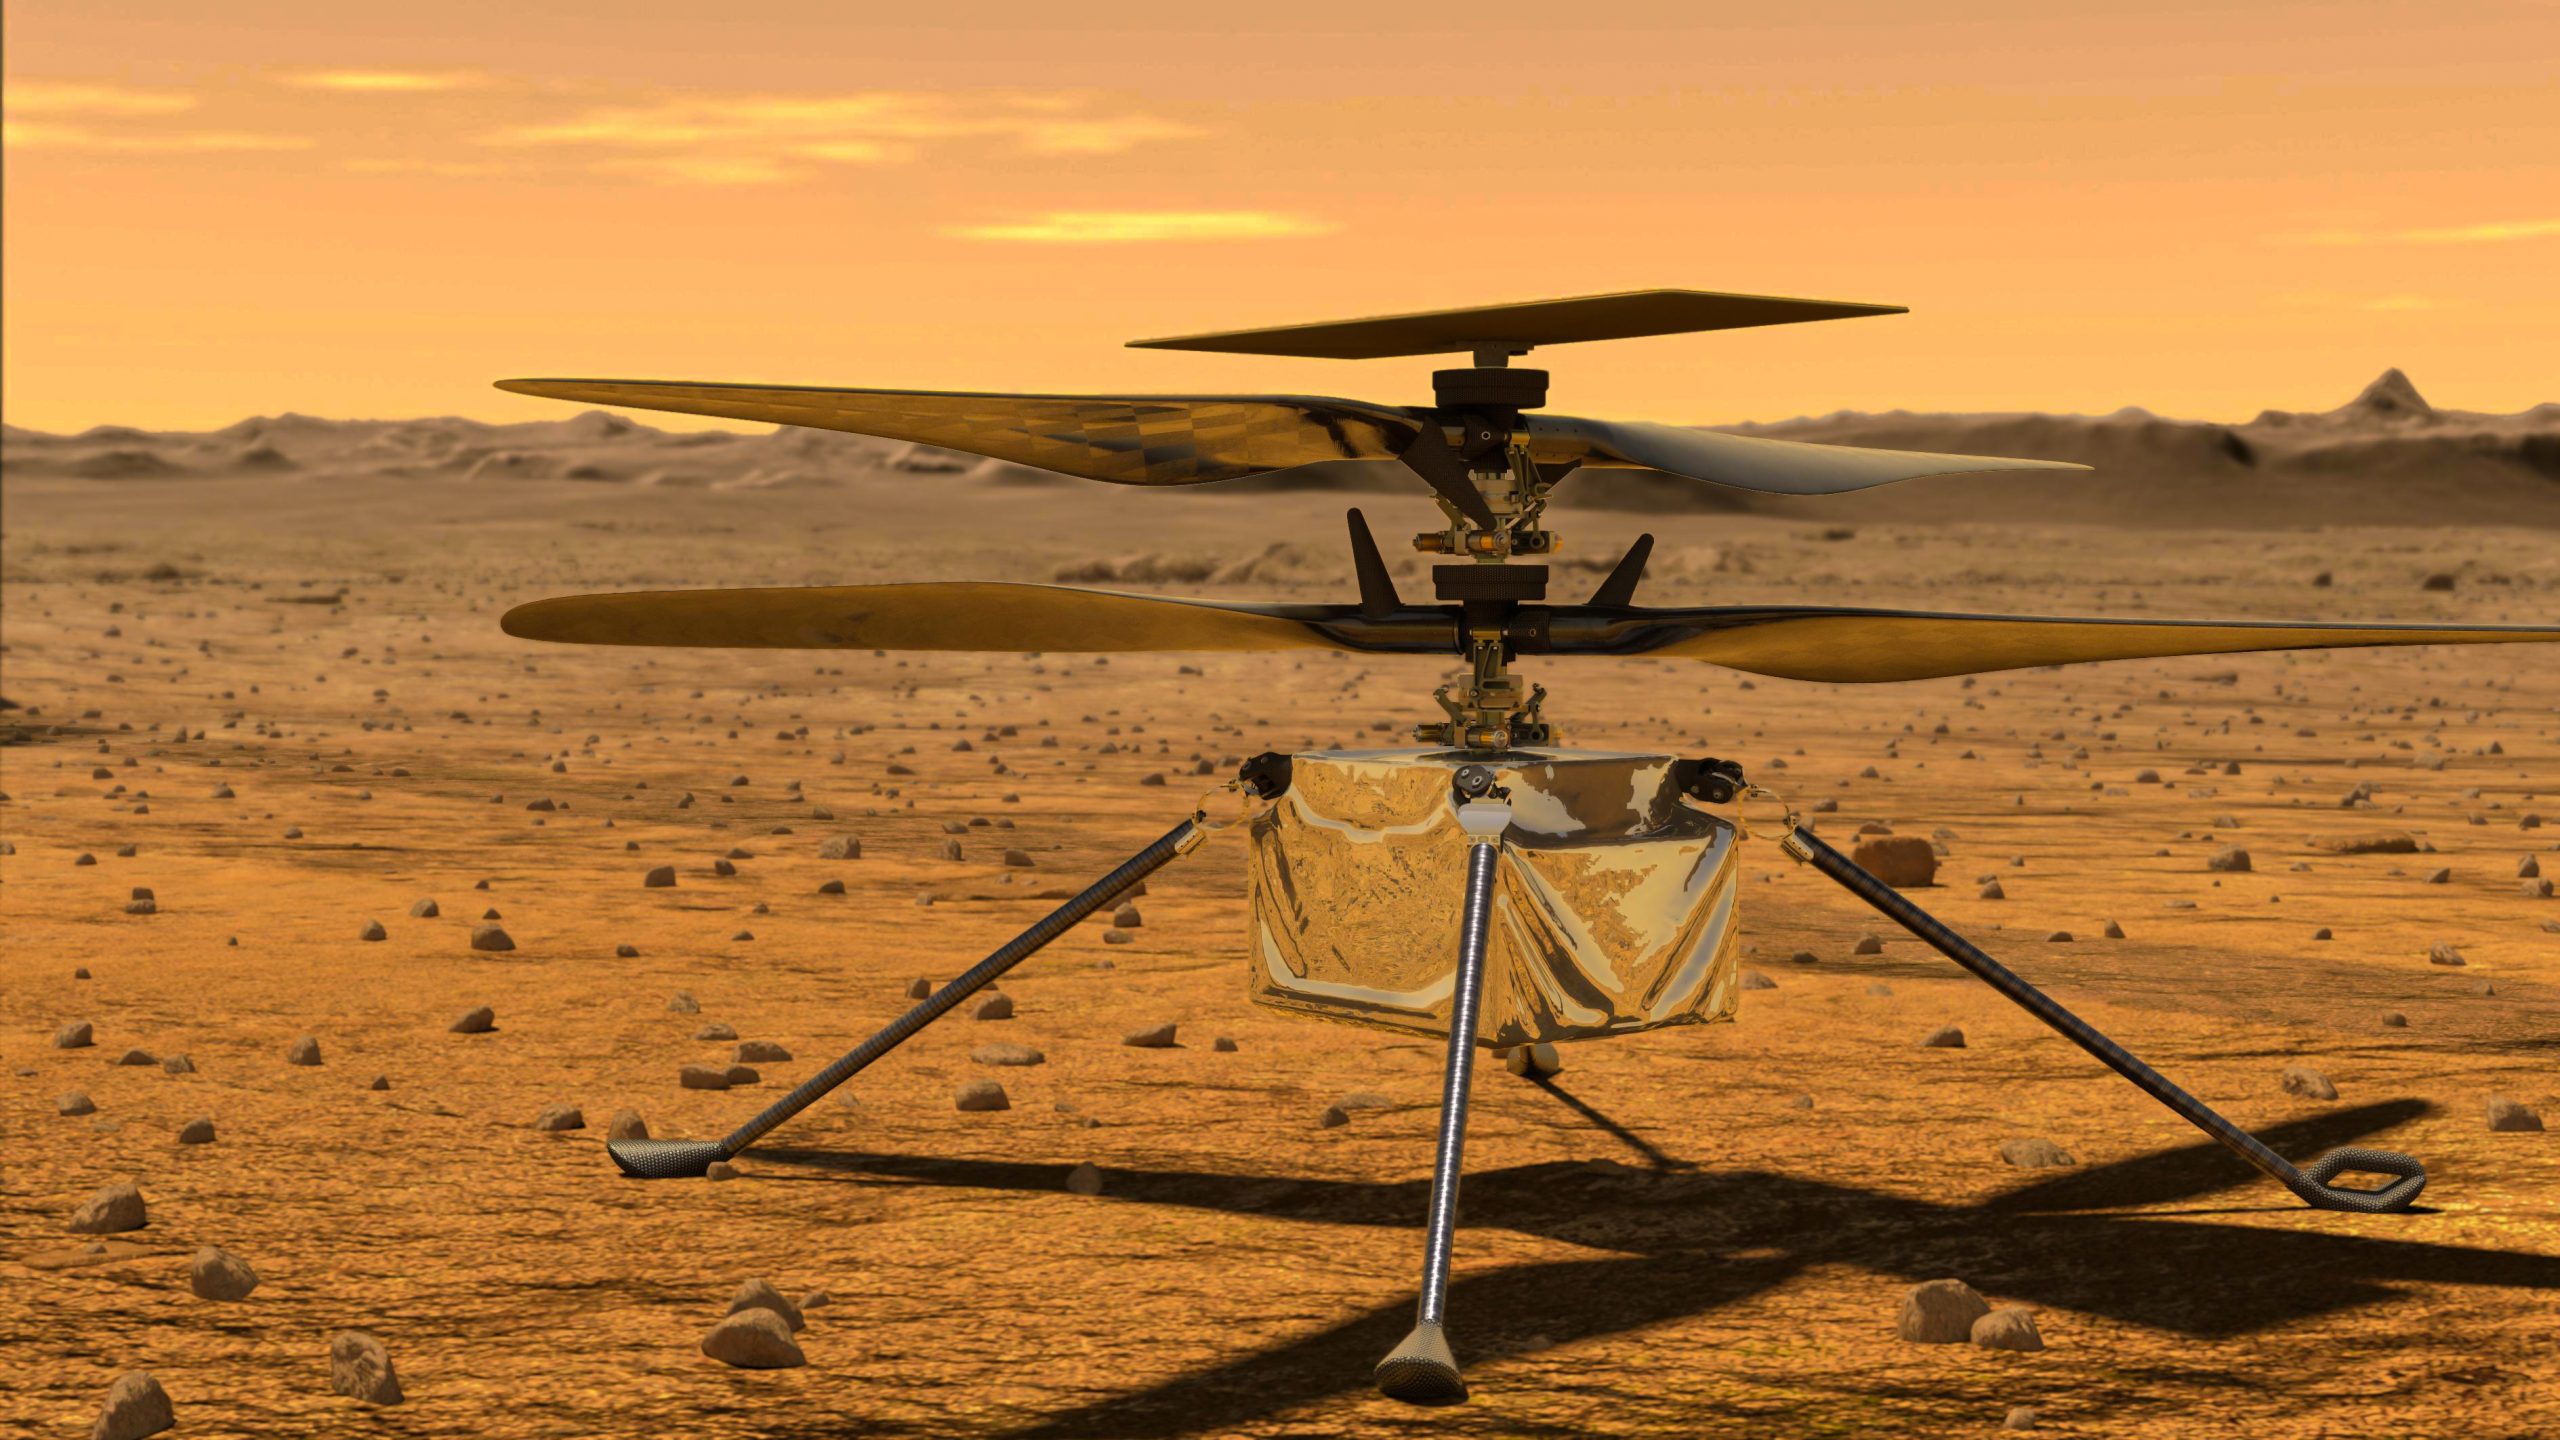 NASA Restores Communication with Mars Helicopter Ingenuity after Communications Dropout - Image